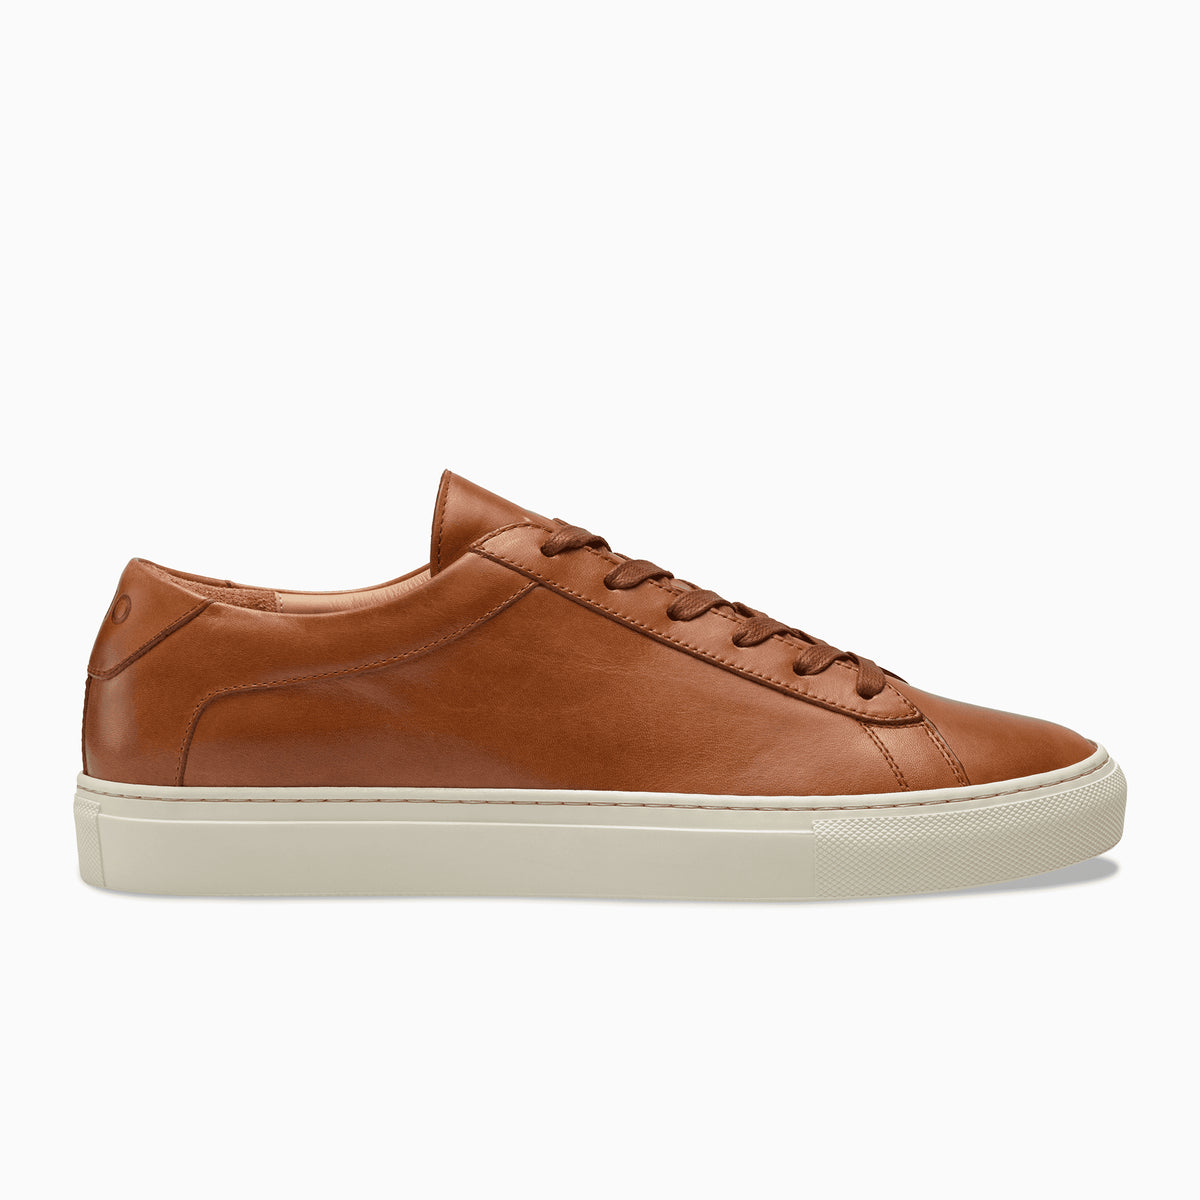 tan leather high top sneakers